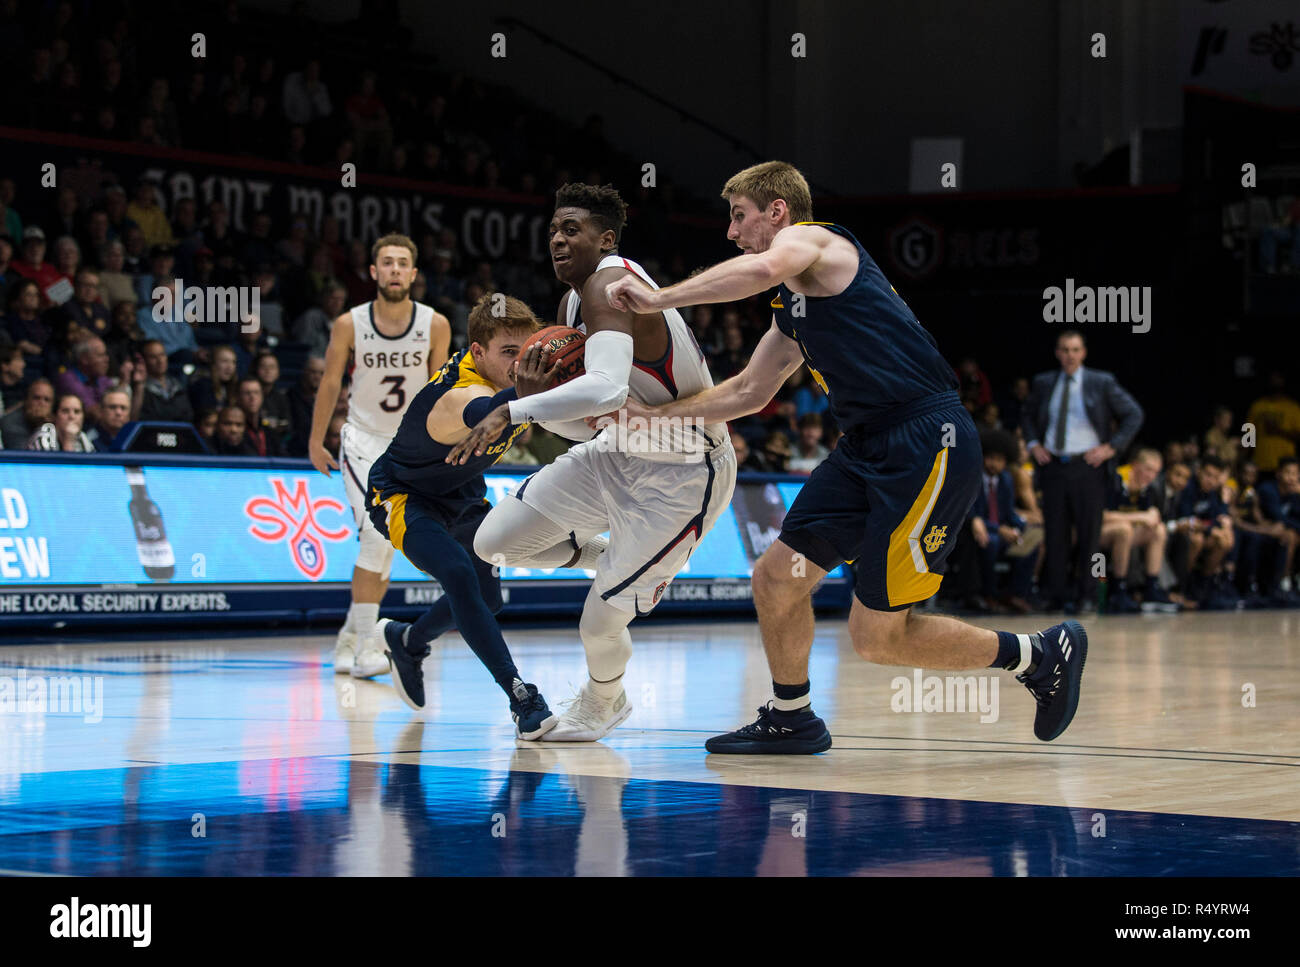 McKeon Pavilion Moraga Calif, USA. 28th Nov, 2018. U.S.A. St. Mary's forward Malik Fitts (24) drives to the hoop during the NCAA Men's Basketball game between UC Irvine Anteaters and the Saint Mary's Gaels 75-80 lost at McKeon Pavilion Moraga Calif. Thurman James/CSM/Alamy Live News Stock Photo